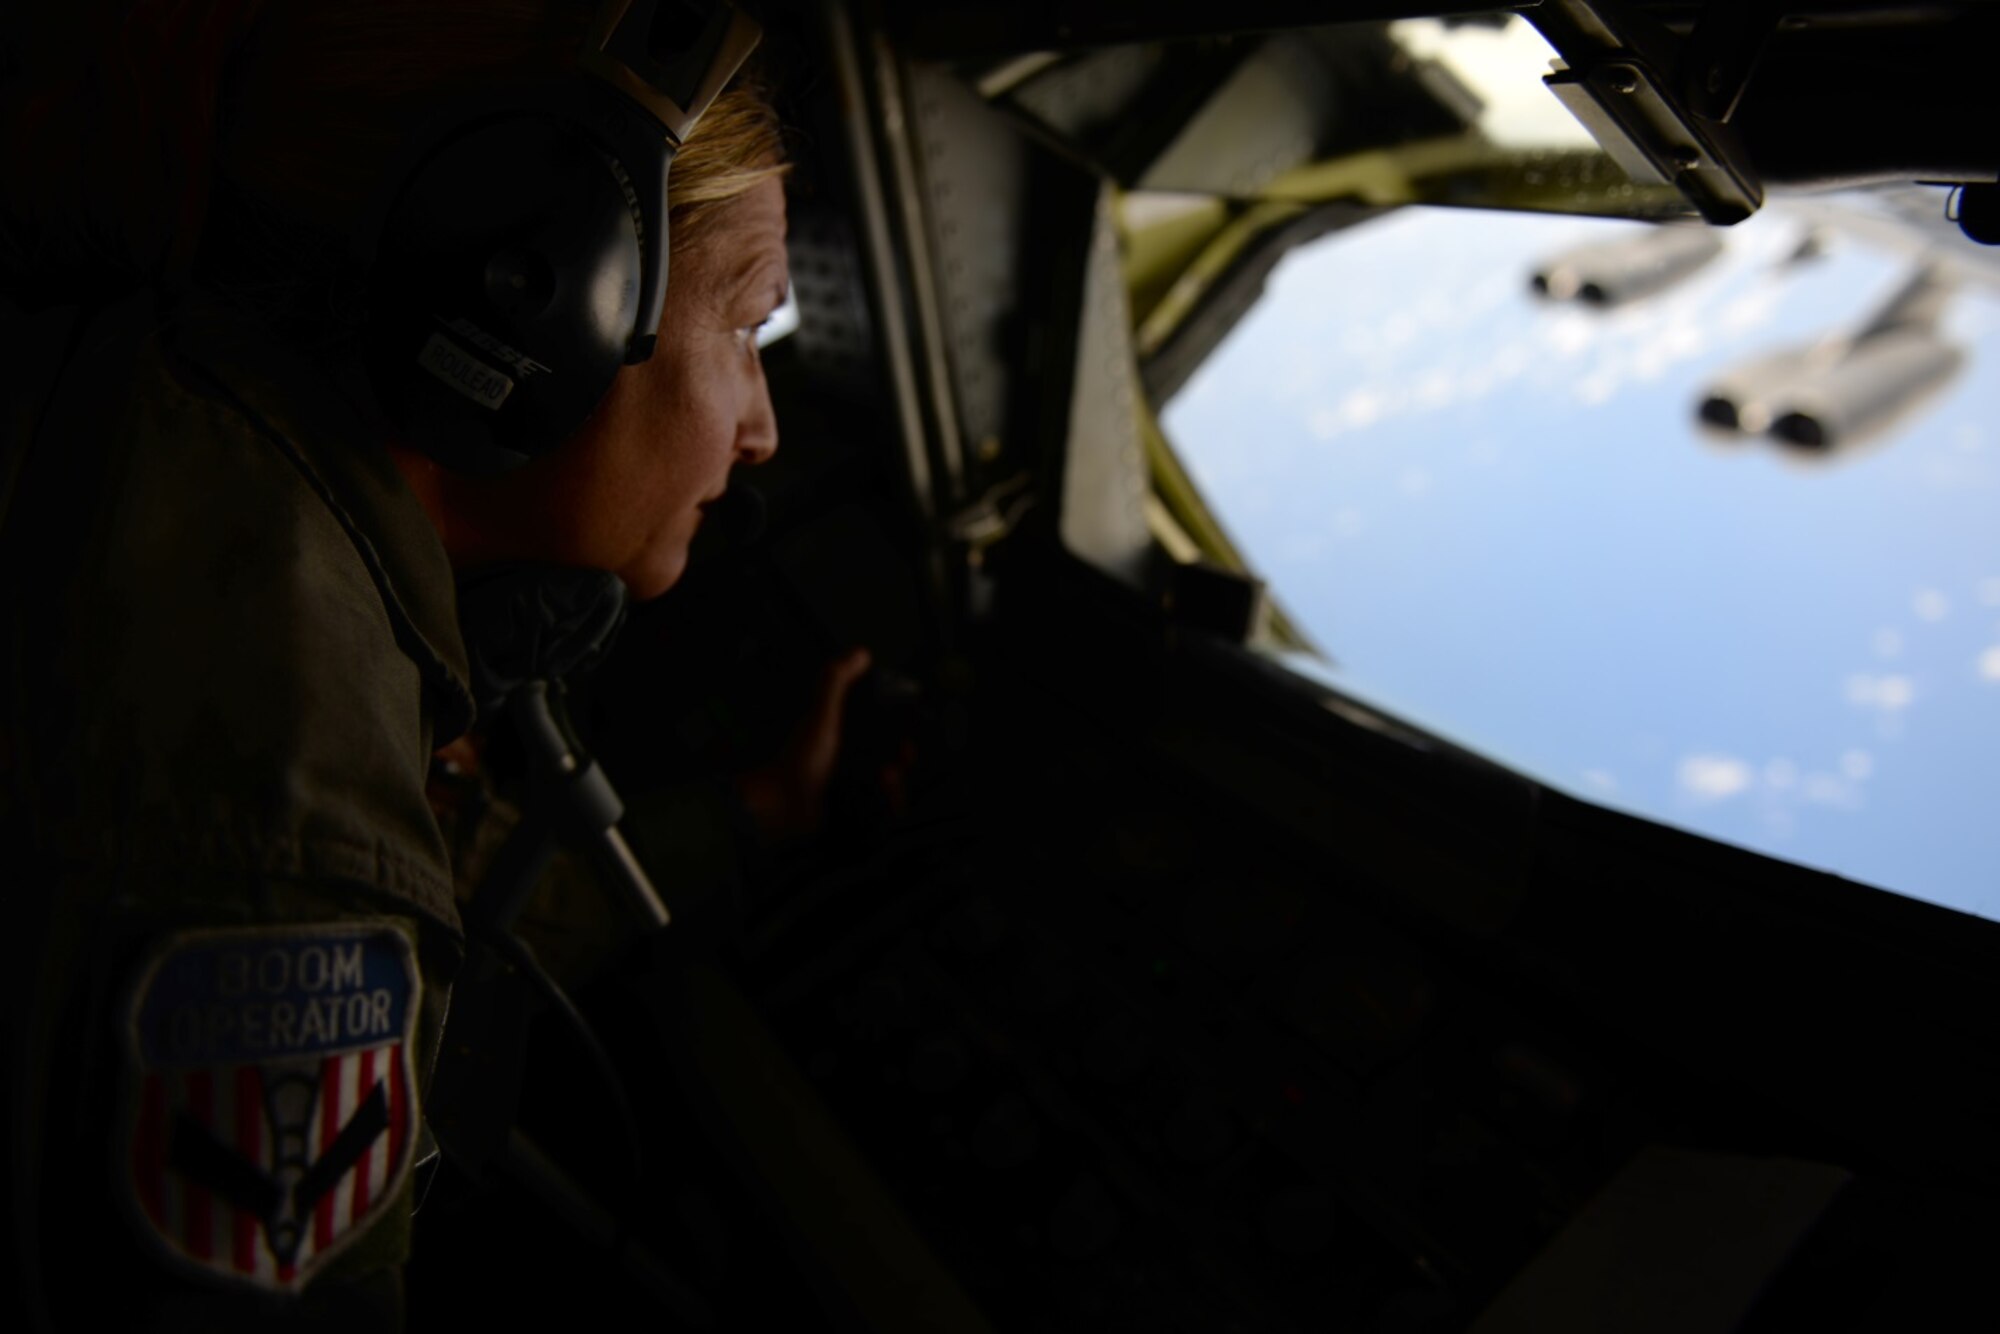 U.S. Air Force Tech. Sgt. Christie Tetley, boom operator from the 157th Air Refueling Wing, prepares a KC-135 Stratotanker from the 506th Expeditionary Air Refueling Squadron to participate in an air refueling training mission Jan. 19, 2015, over the Pacific Ocean near Andersen Air Force Base, Guam. The 157 ARW flight crew executed the training mission along with a B-52 Stratofortress operated by crew members from the 96th Expeditionary Bomb Squadron, which is deployed from Barksdale Air Force Base, L.A. (U.S. Air National Guard photo by Senior Airman Kayla McWalter/RELEASED)   